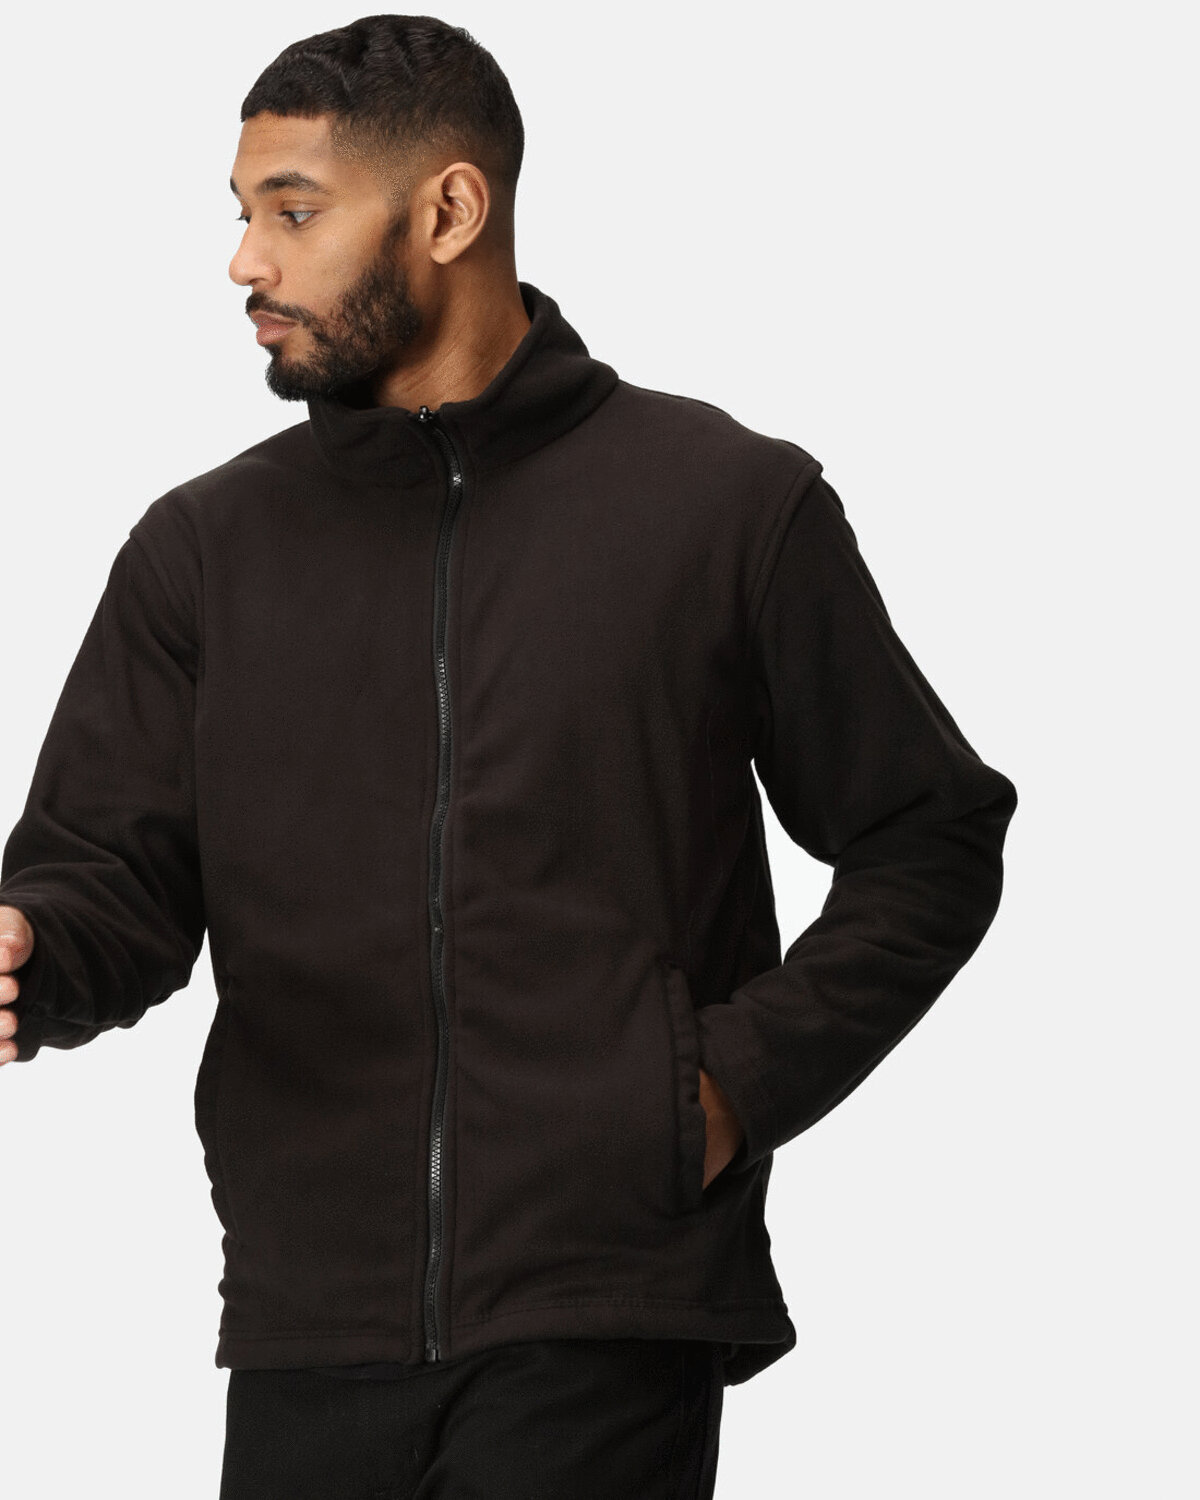 RG095M-CLASSIC 3 IN 1 JACKET